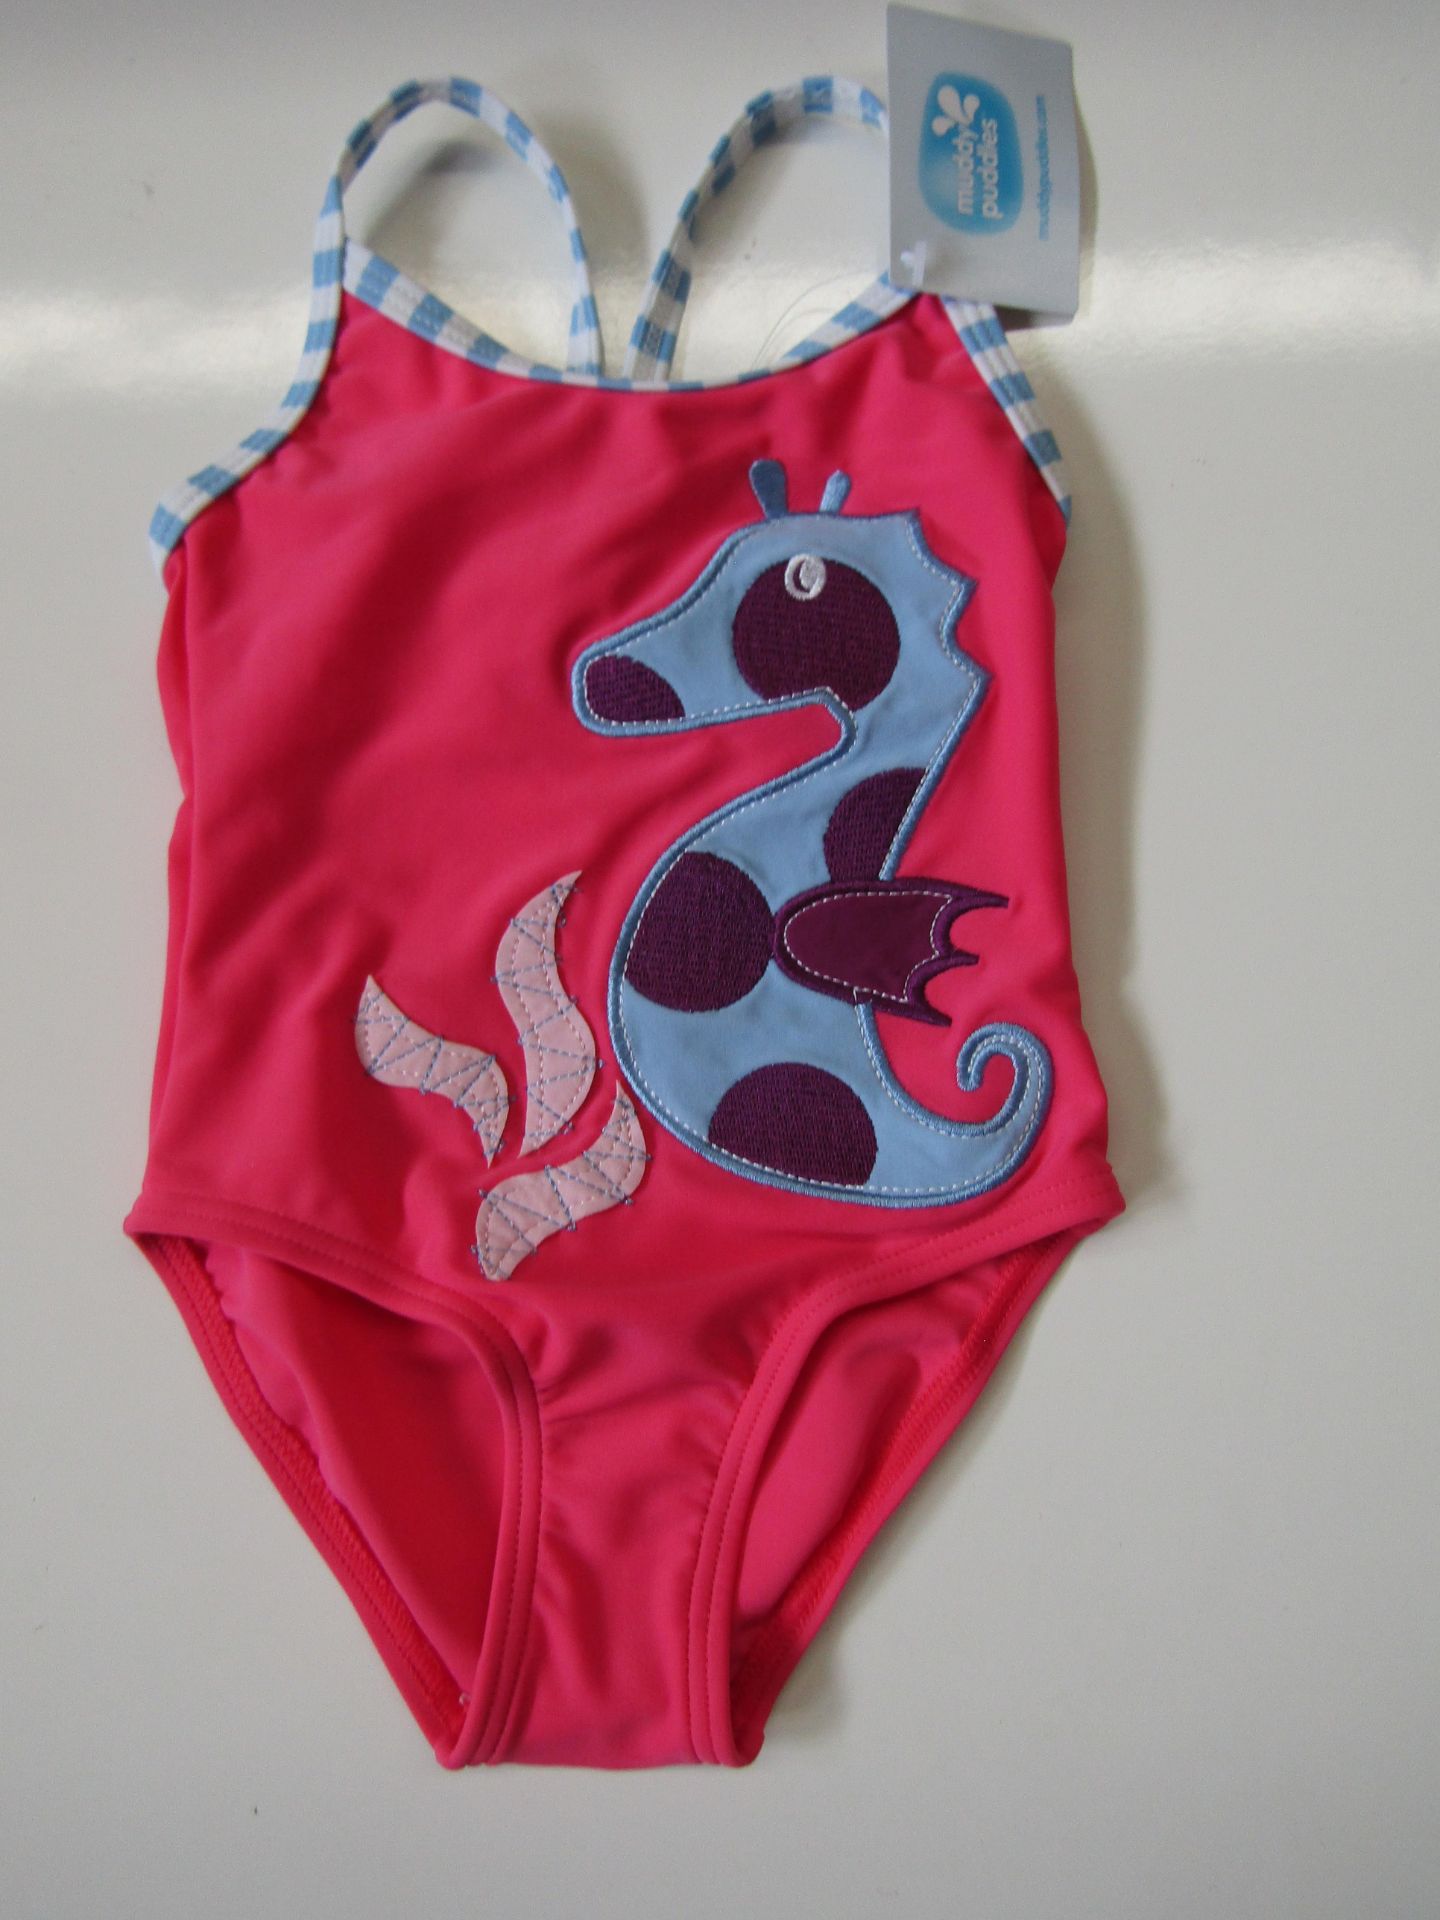 9 x Muddy Puddles - Girls Seahorse Swimsuits Pink/Blue - Size 6-12 Months - New & Packaged.